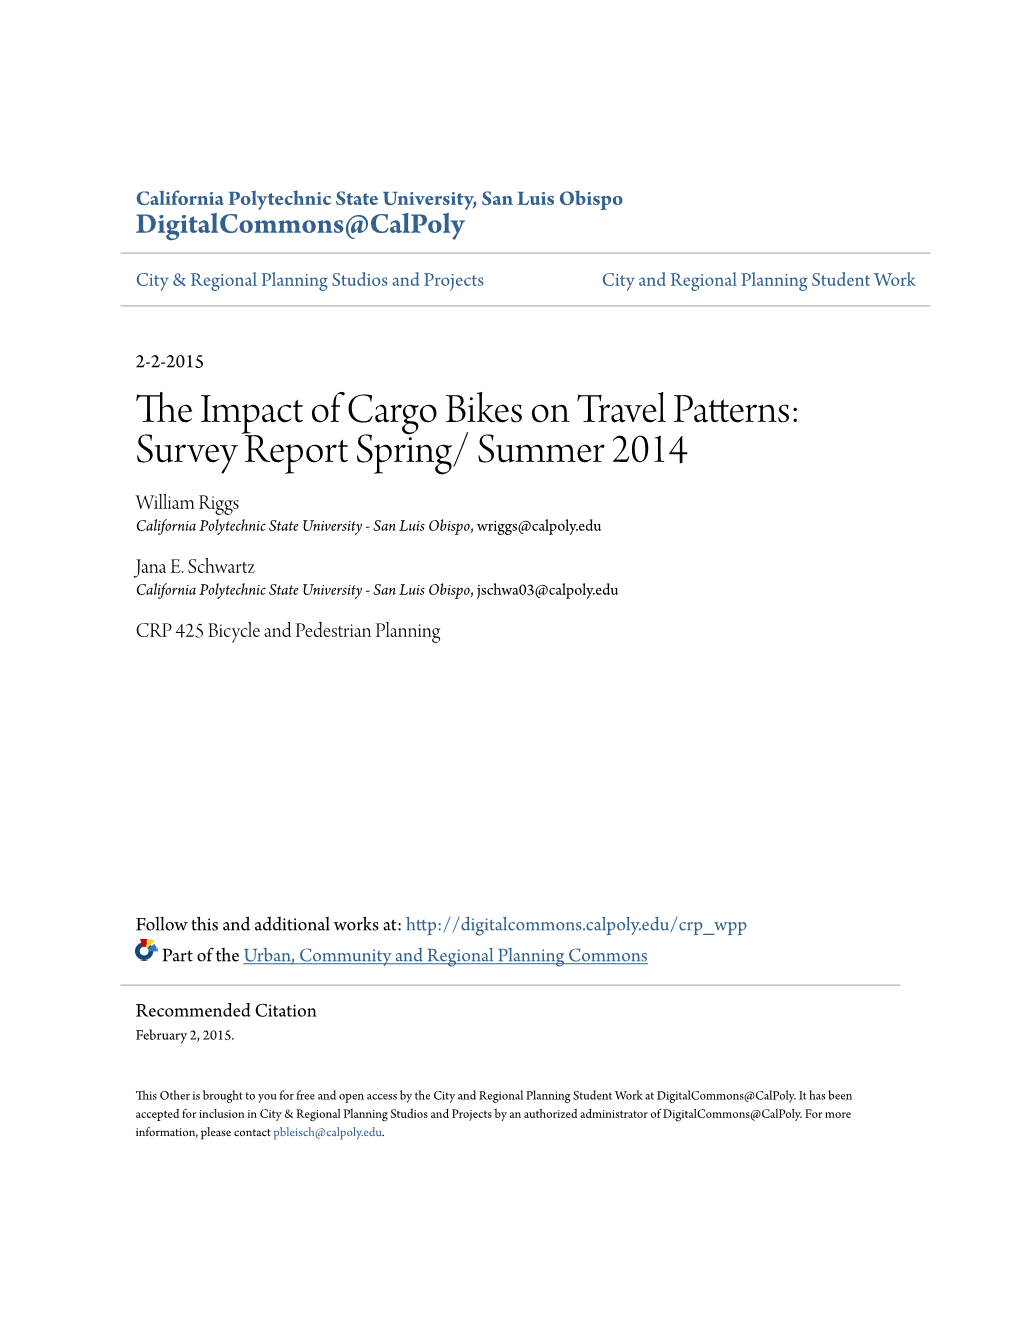 The Impact of Cargo Bikes on Travel Patterns: Survey Report Spring